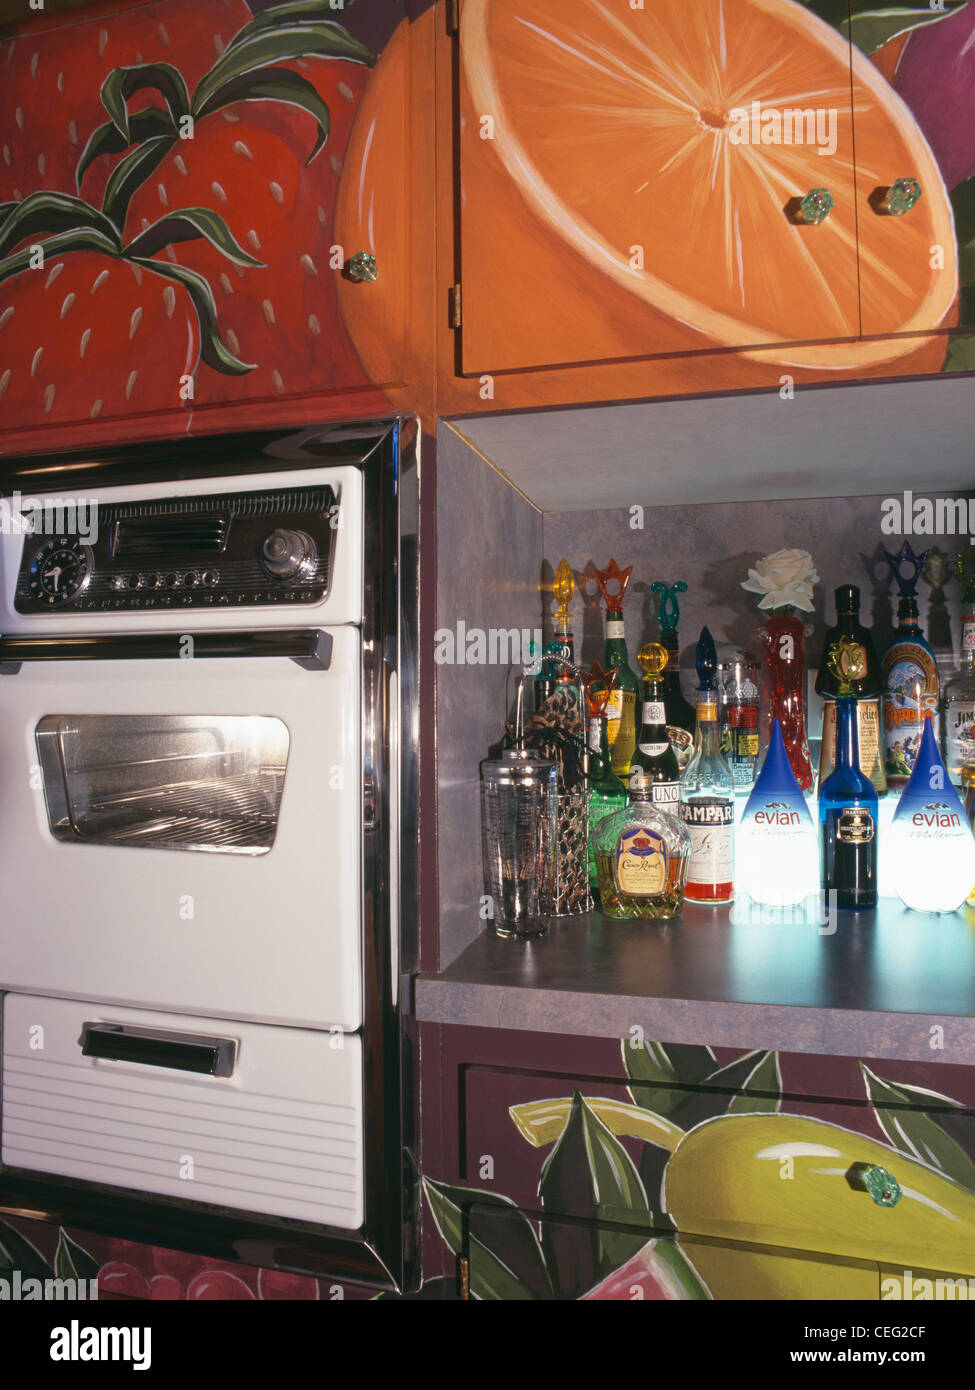 Close-up of oven and chilled drinks cabinet below trompe-l'oeil fruit on fitted cupboards in retro kitchen Stock Photo